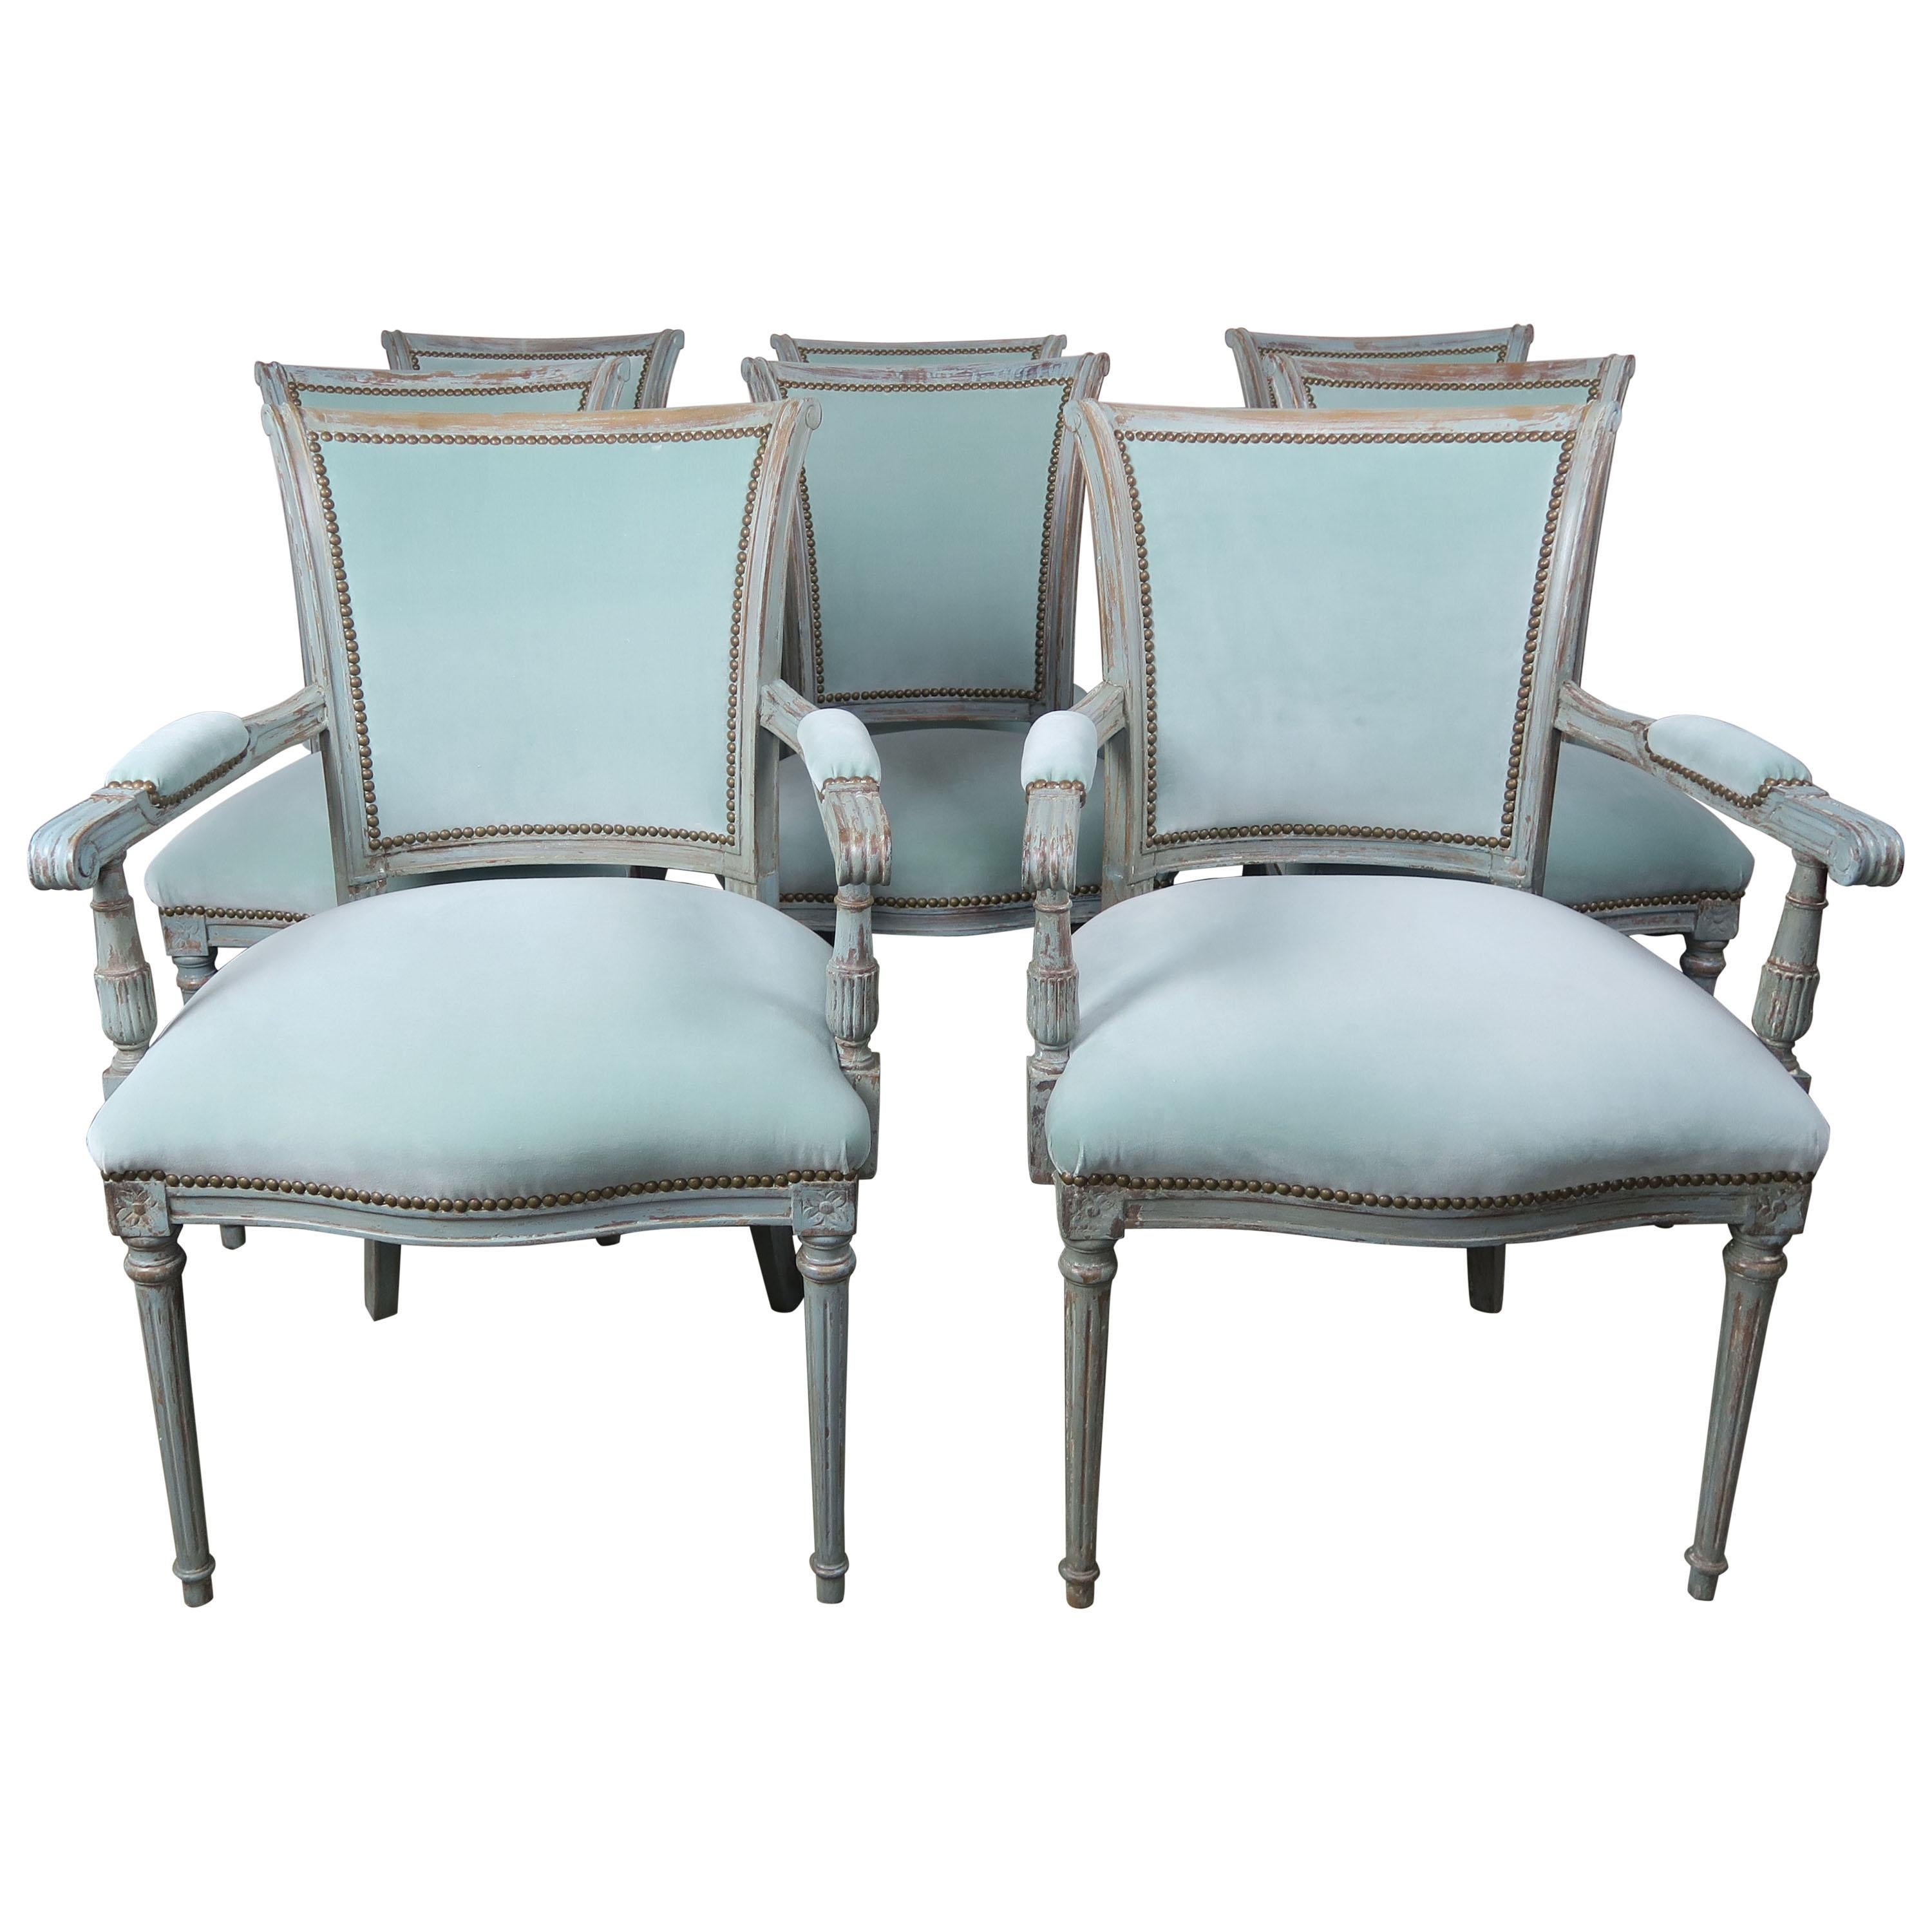 Set of Eight Neoclassical Style Velvet Upholstered Dining Chairs